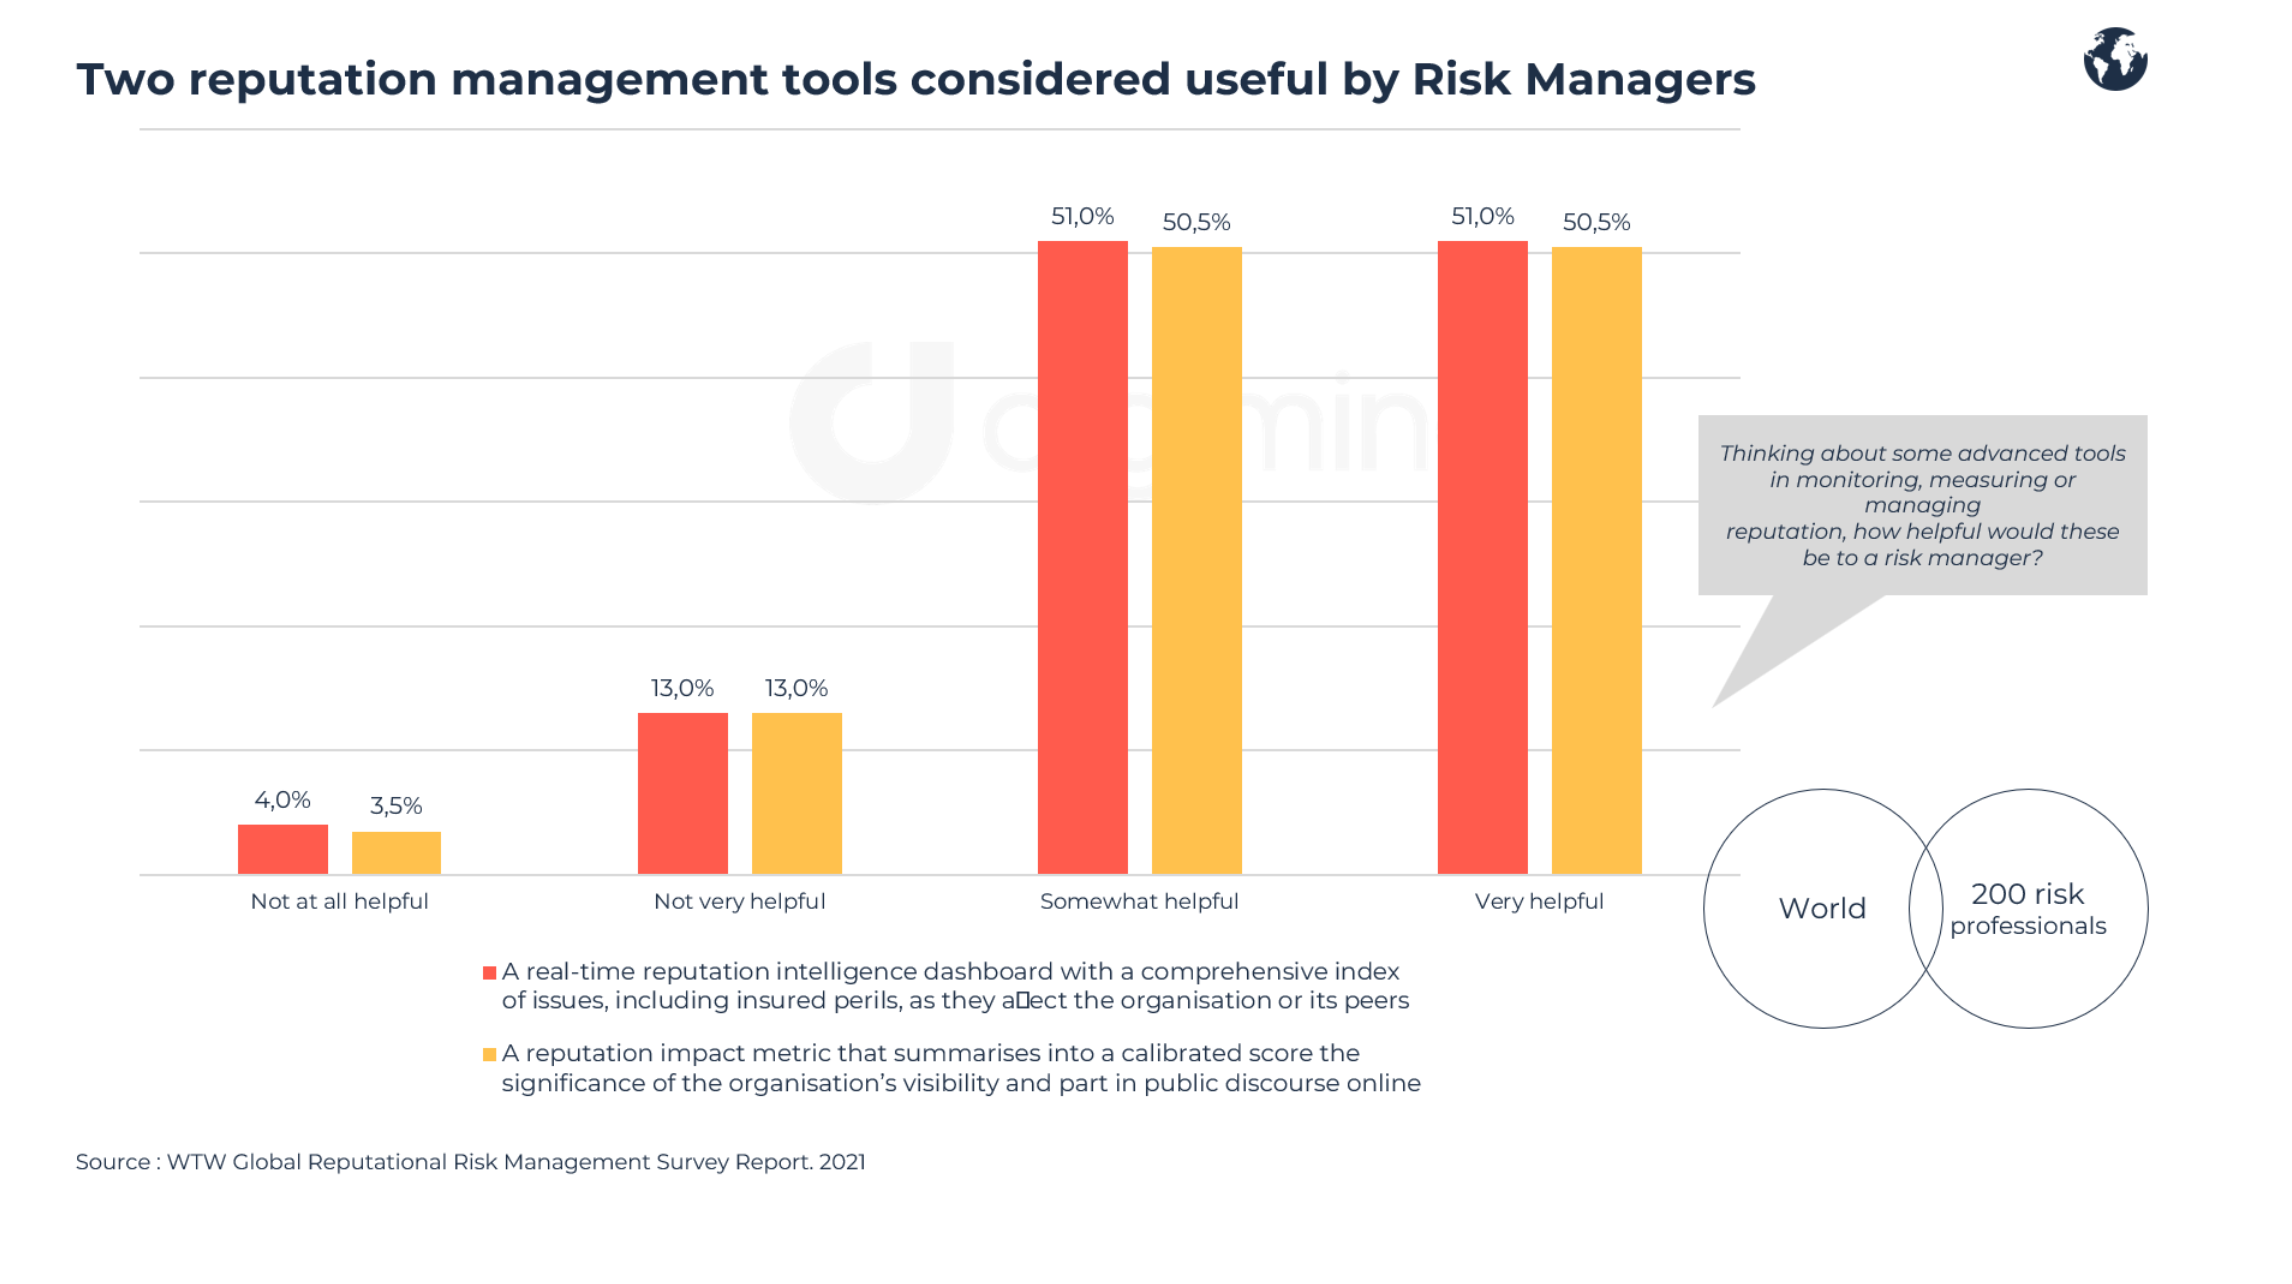 Two reputation management tools considered useful by Risk Managers